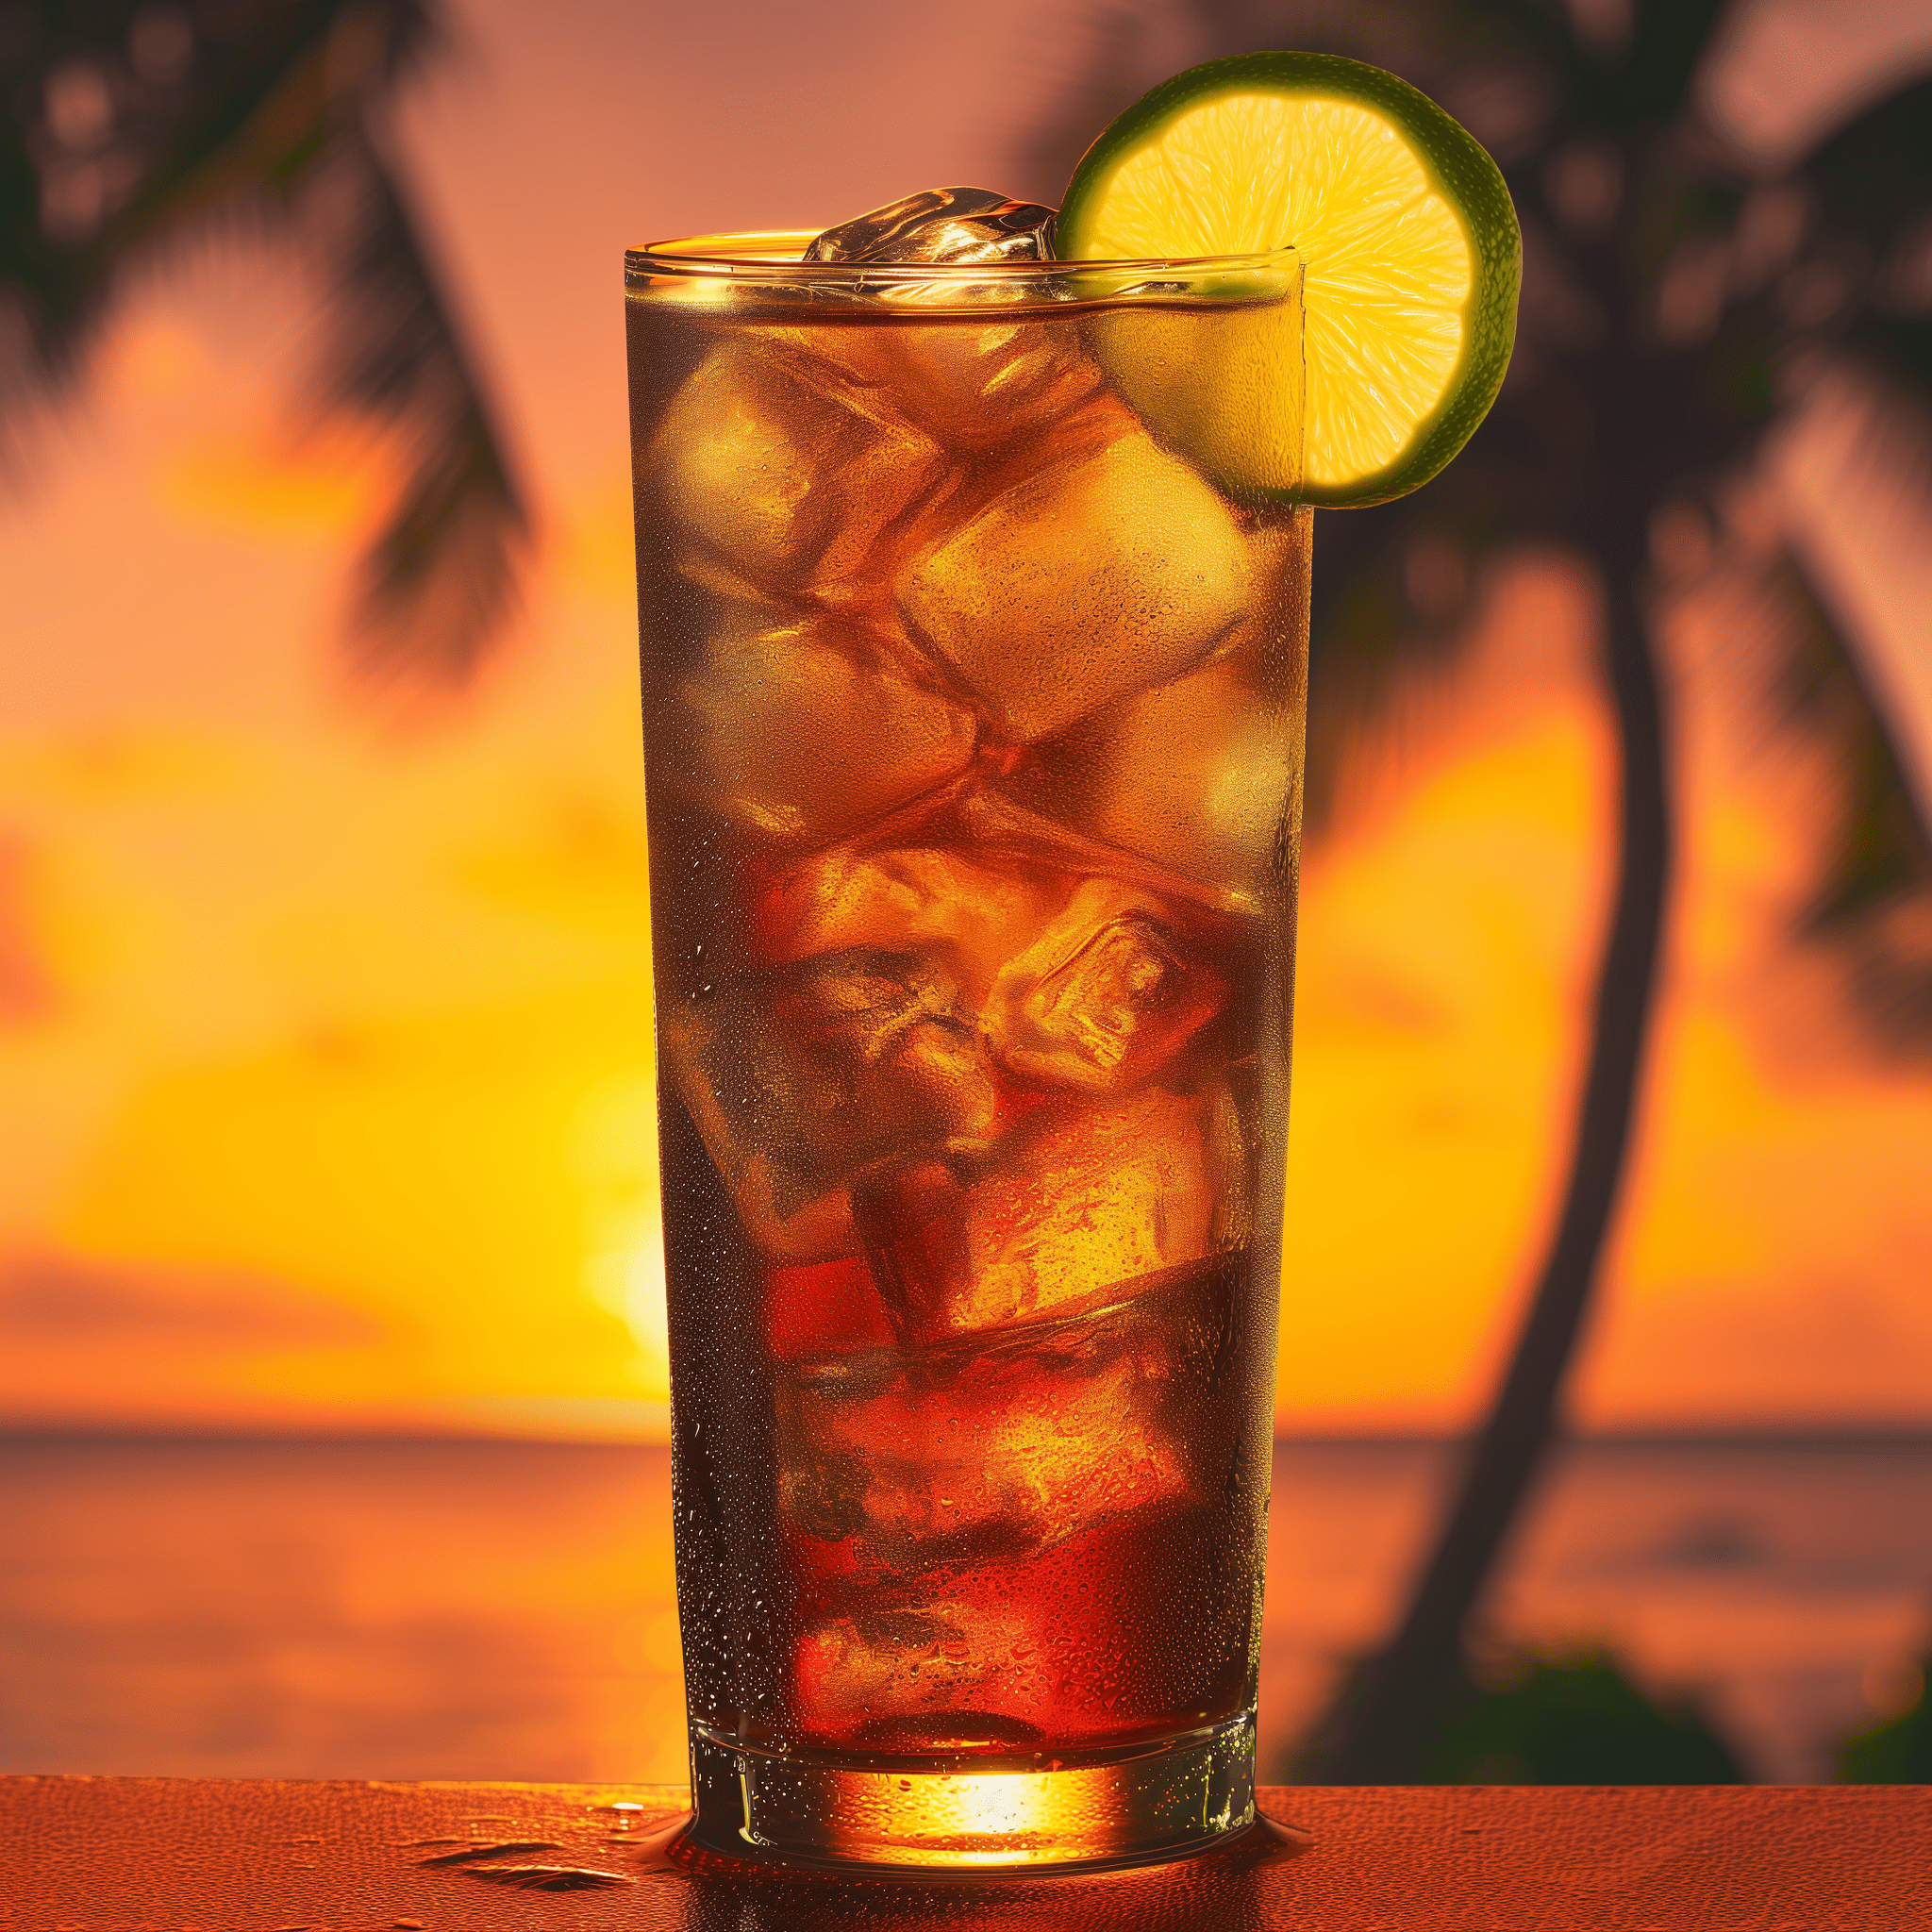 Skinny Pirate Cocktail Recipe - The Skinny Pirate is a refreshingly light cocktail with the warm, spicy notes of the rum shining through. The diet cola adds fizz and sweetness without the heaviness of sugar, making it a guilt-free indulgence.